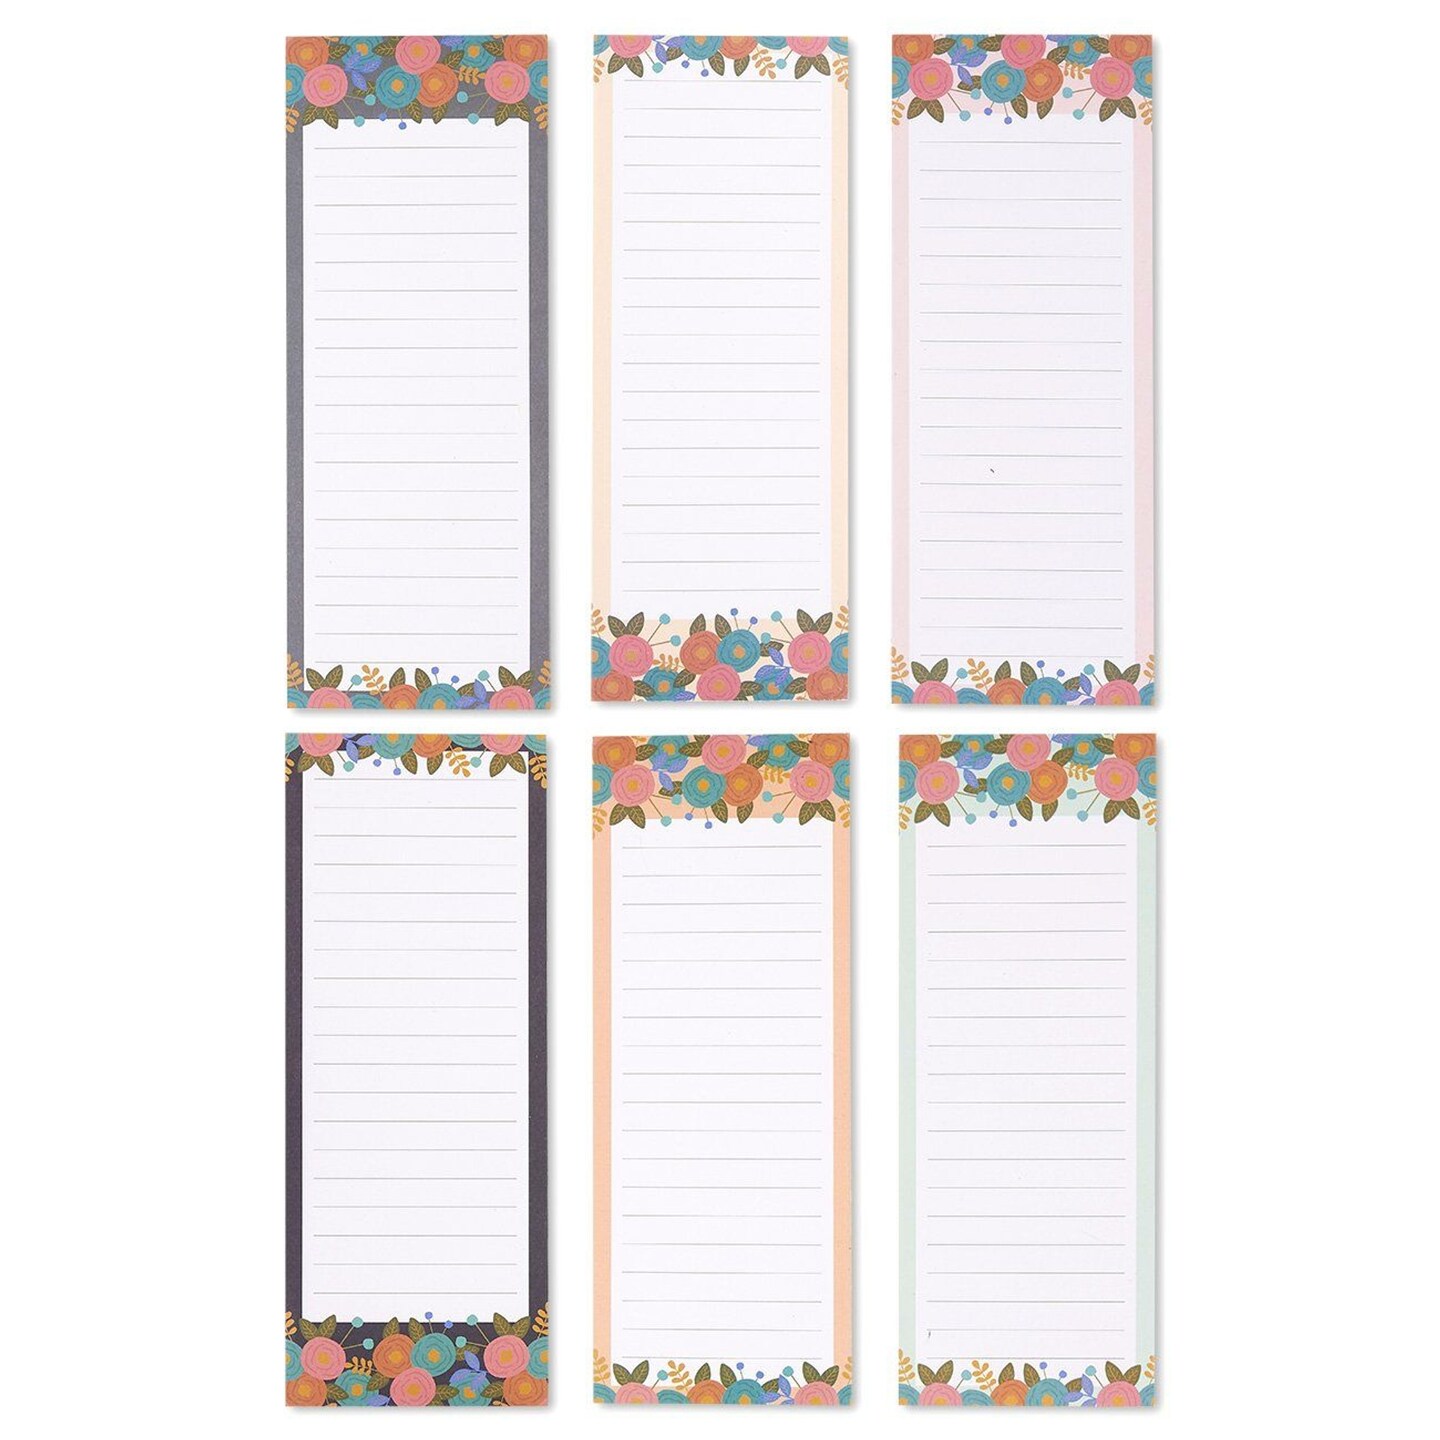 6 Pack Magnetic Notepads for Refrigerator - Shopping List, To-Do, Memo, Scratch Pads (6 Floral Designs, 60 Sheets Each)